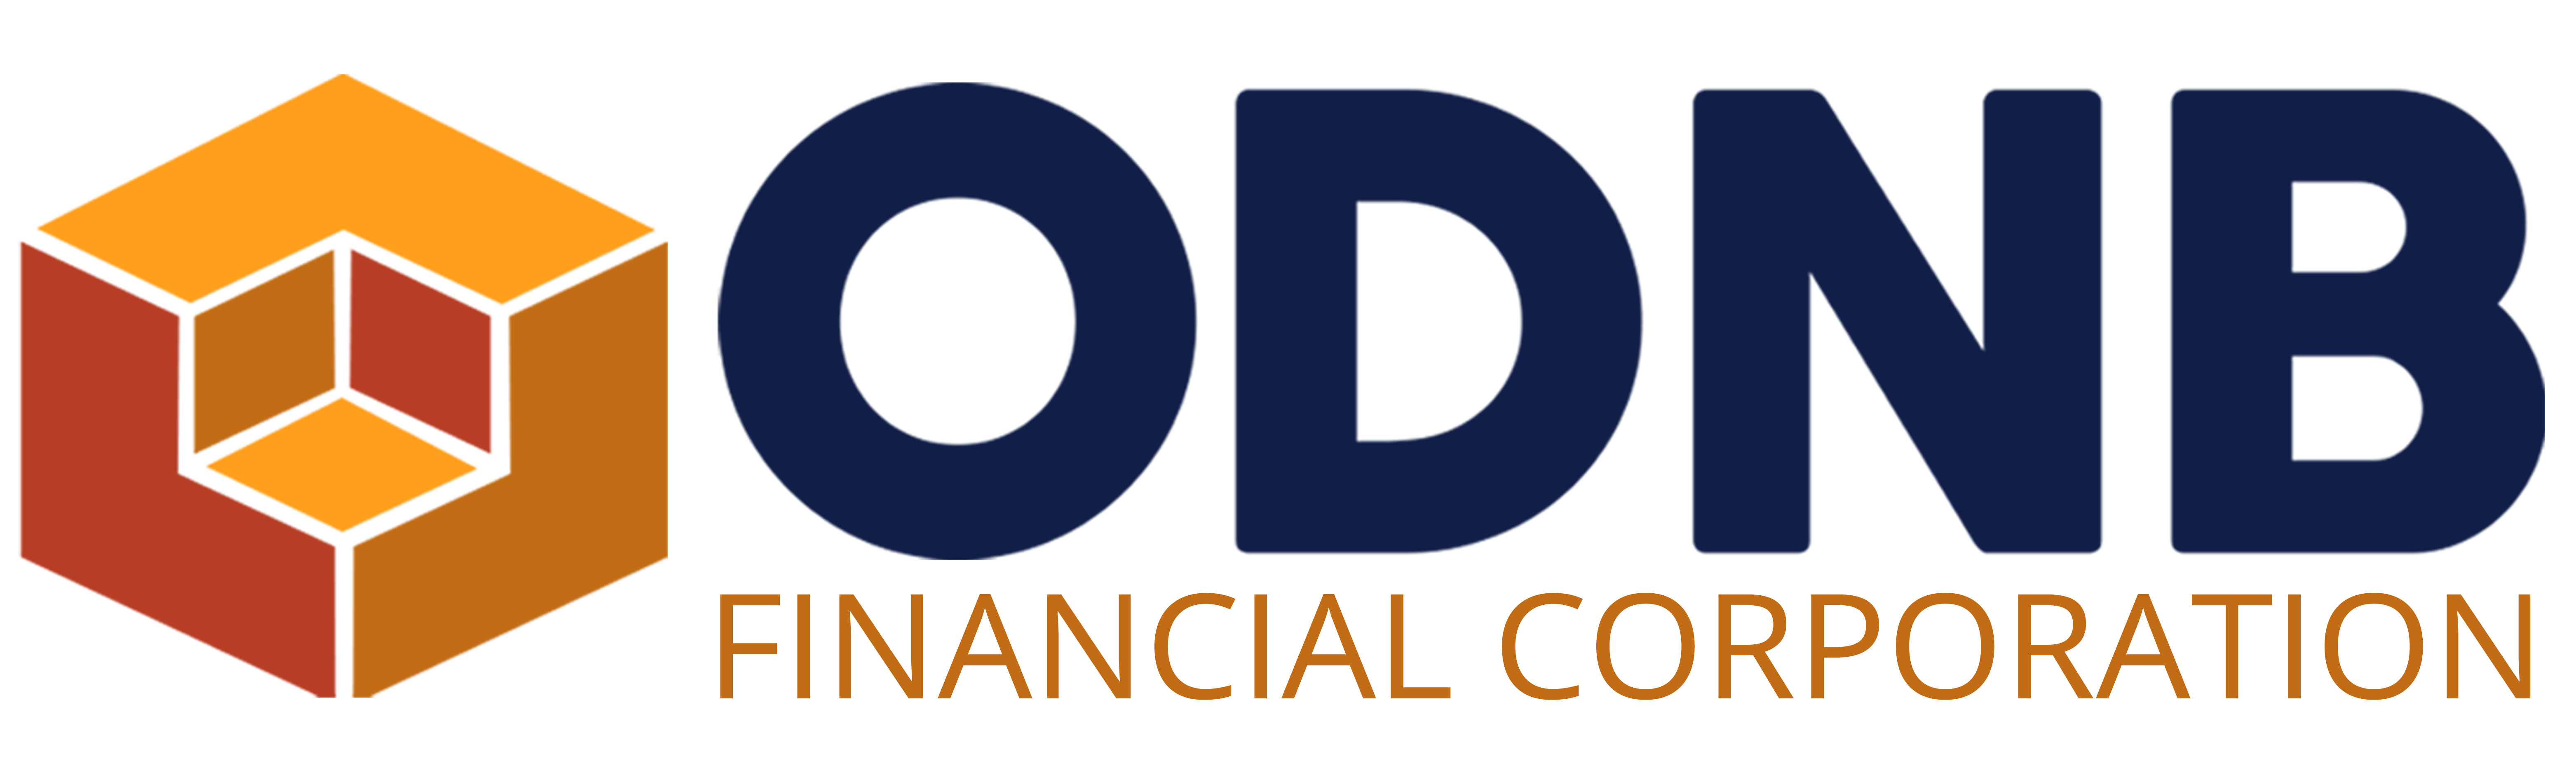 ODNB_Financial_Corp_Final_PNG_2